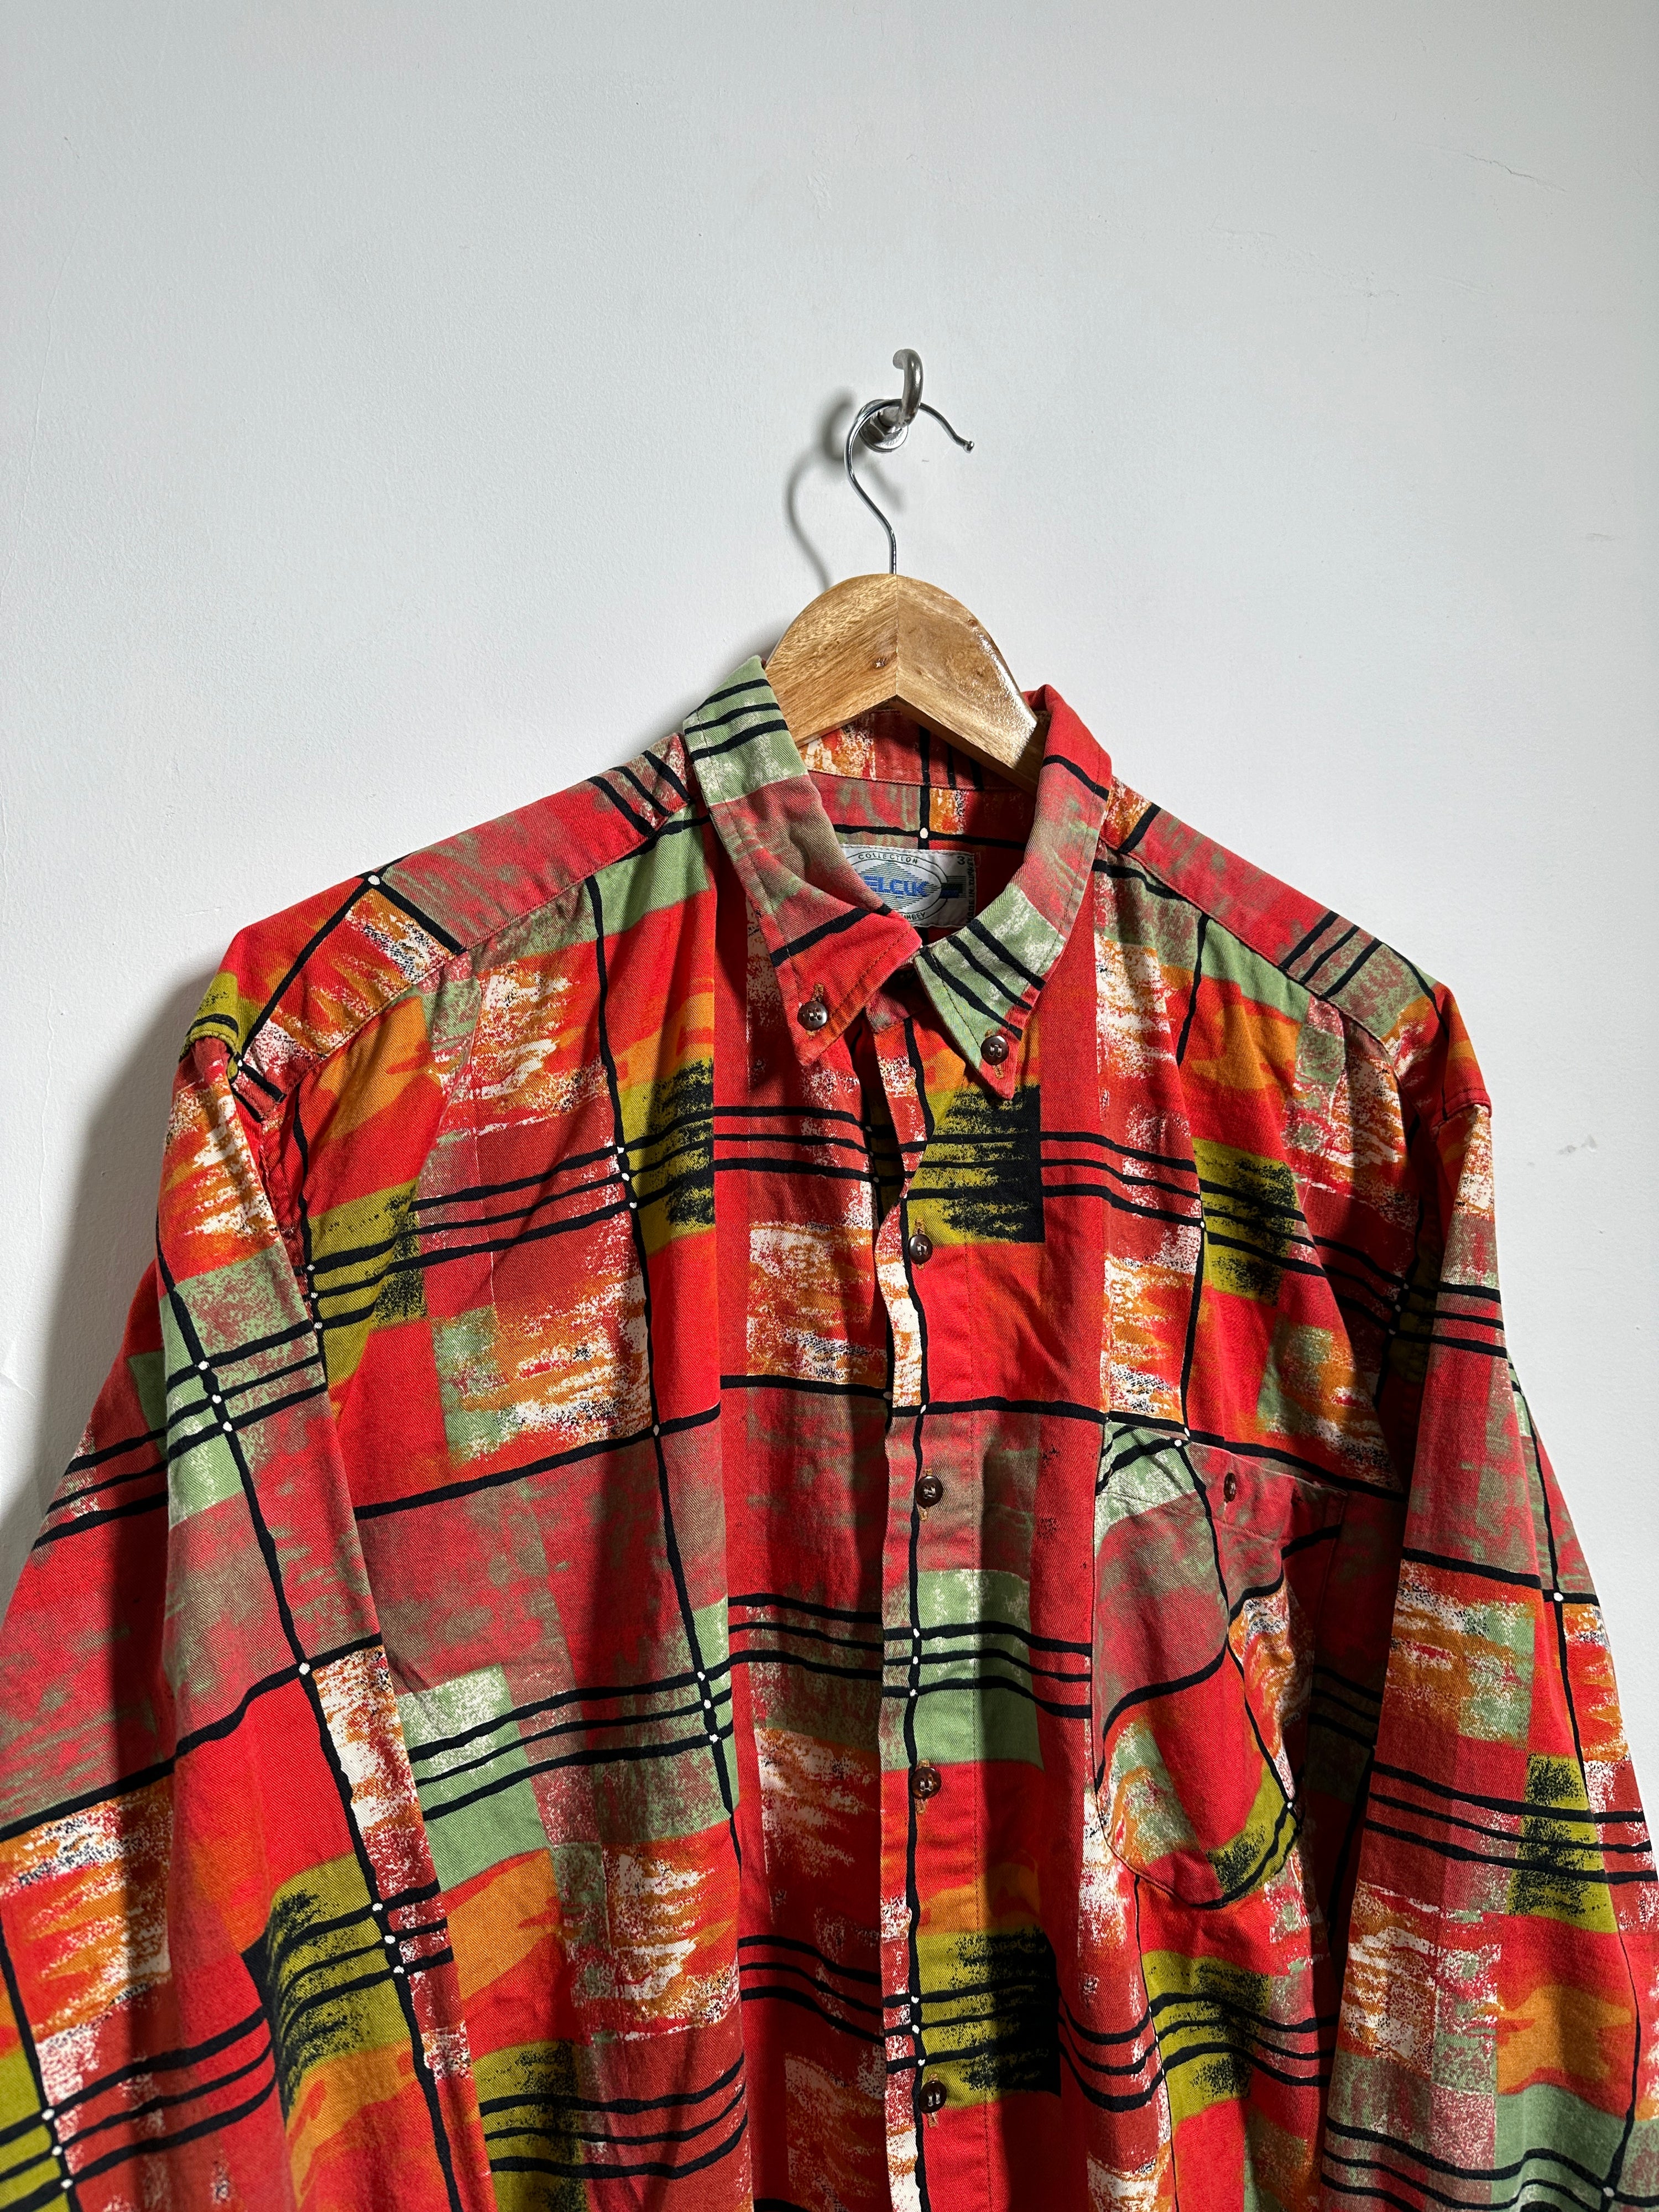 Vintage long-sleeve shirt in red with patterns